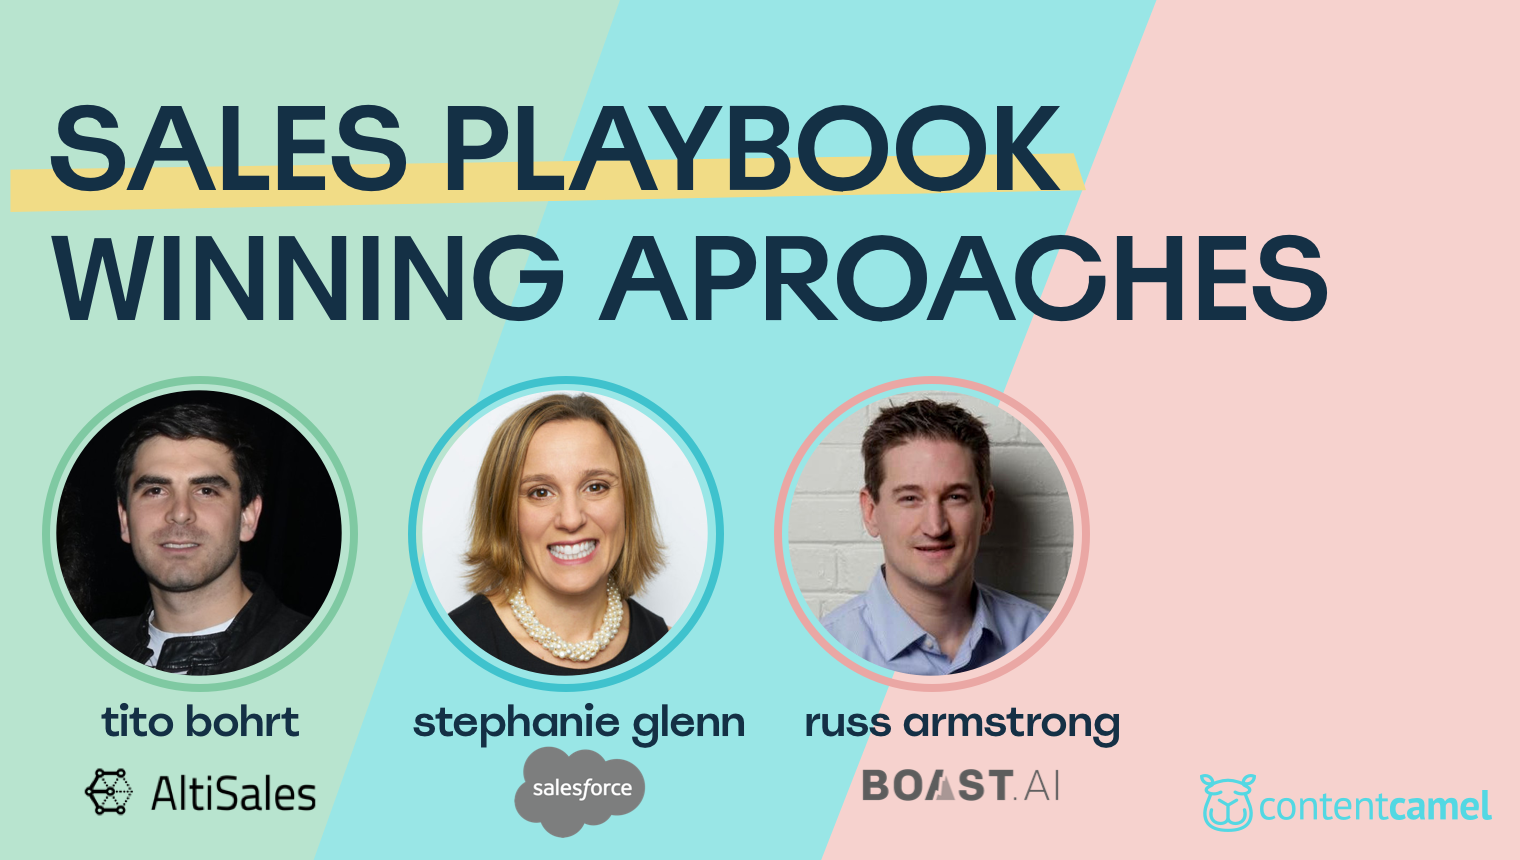 Discover sales playbook insights from 3 sales leaders